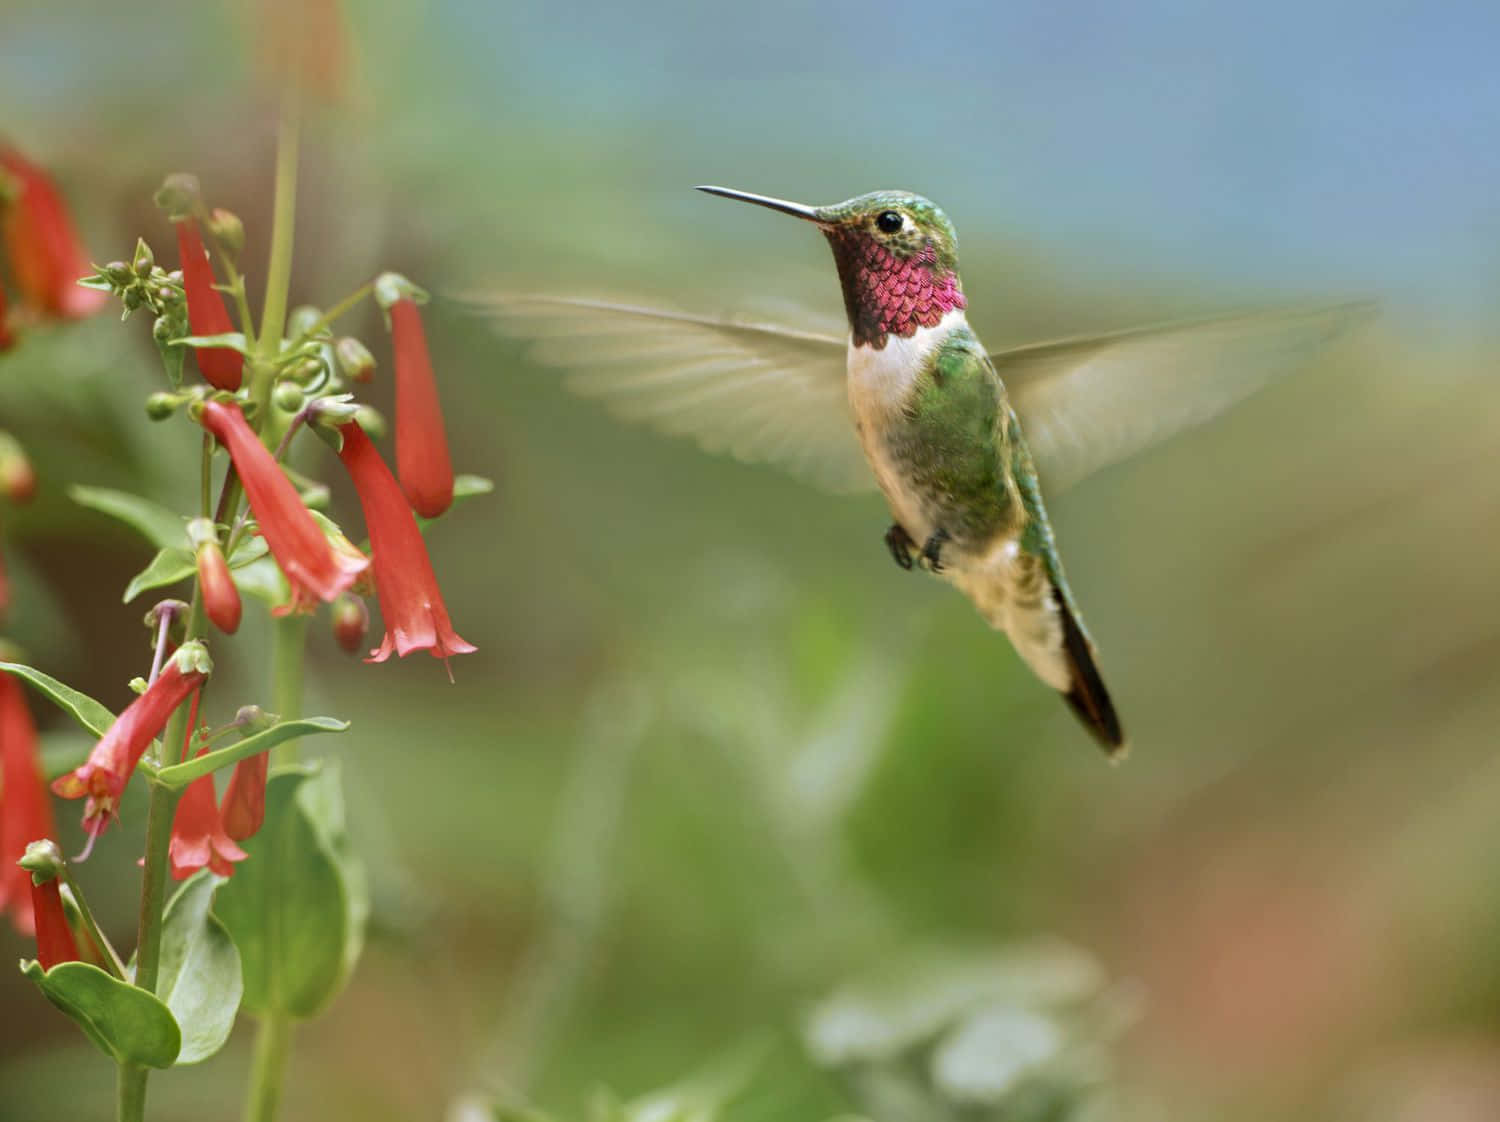 A tiny hummingbird gathering nectar from a bright pink flower